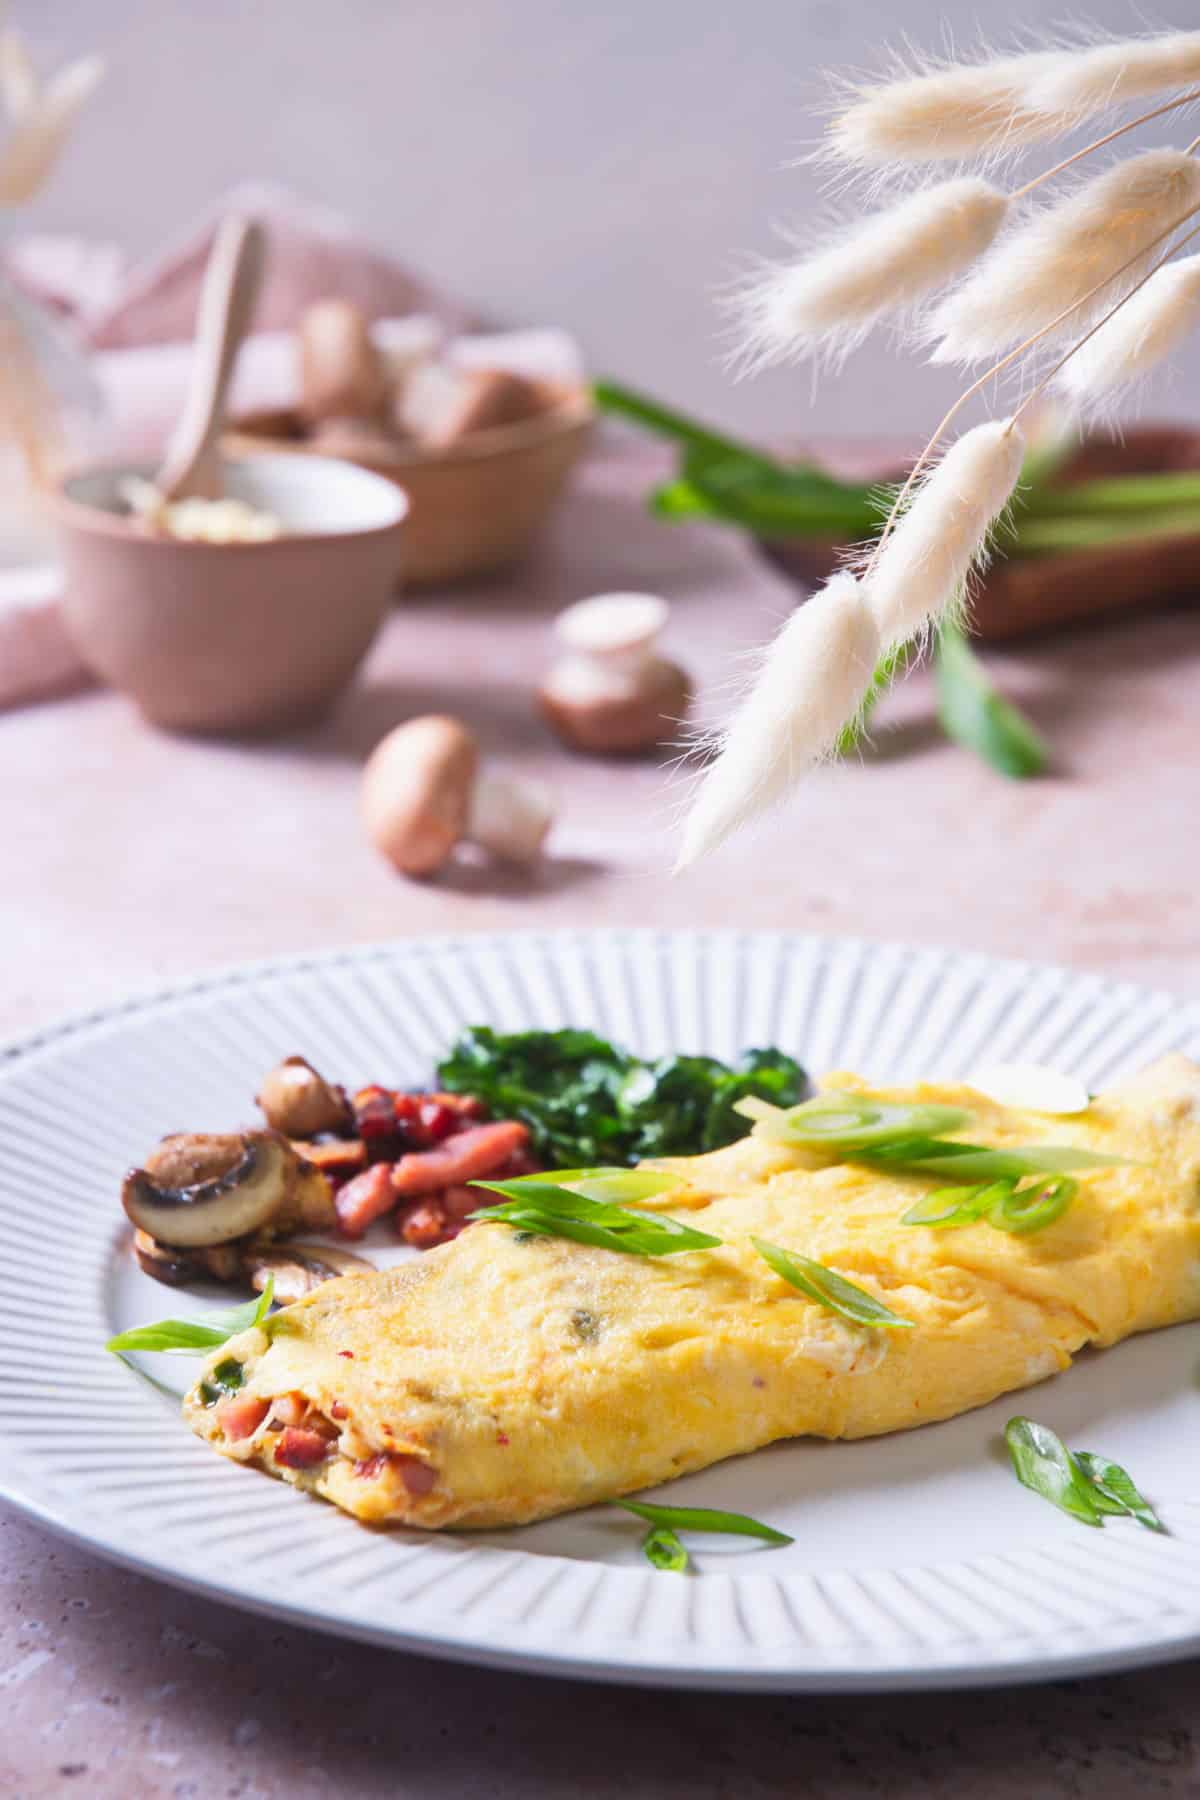 Kimchi omelette on white plate with sliced scallions.